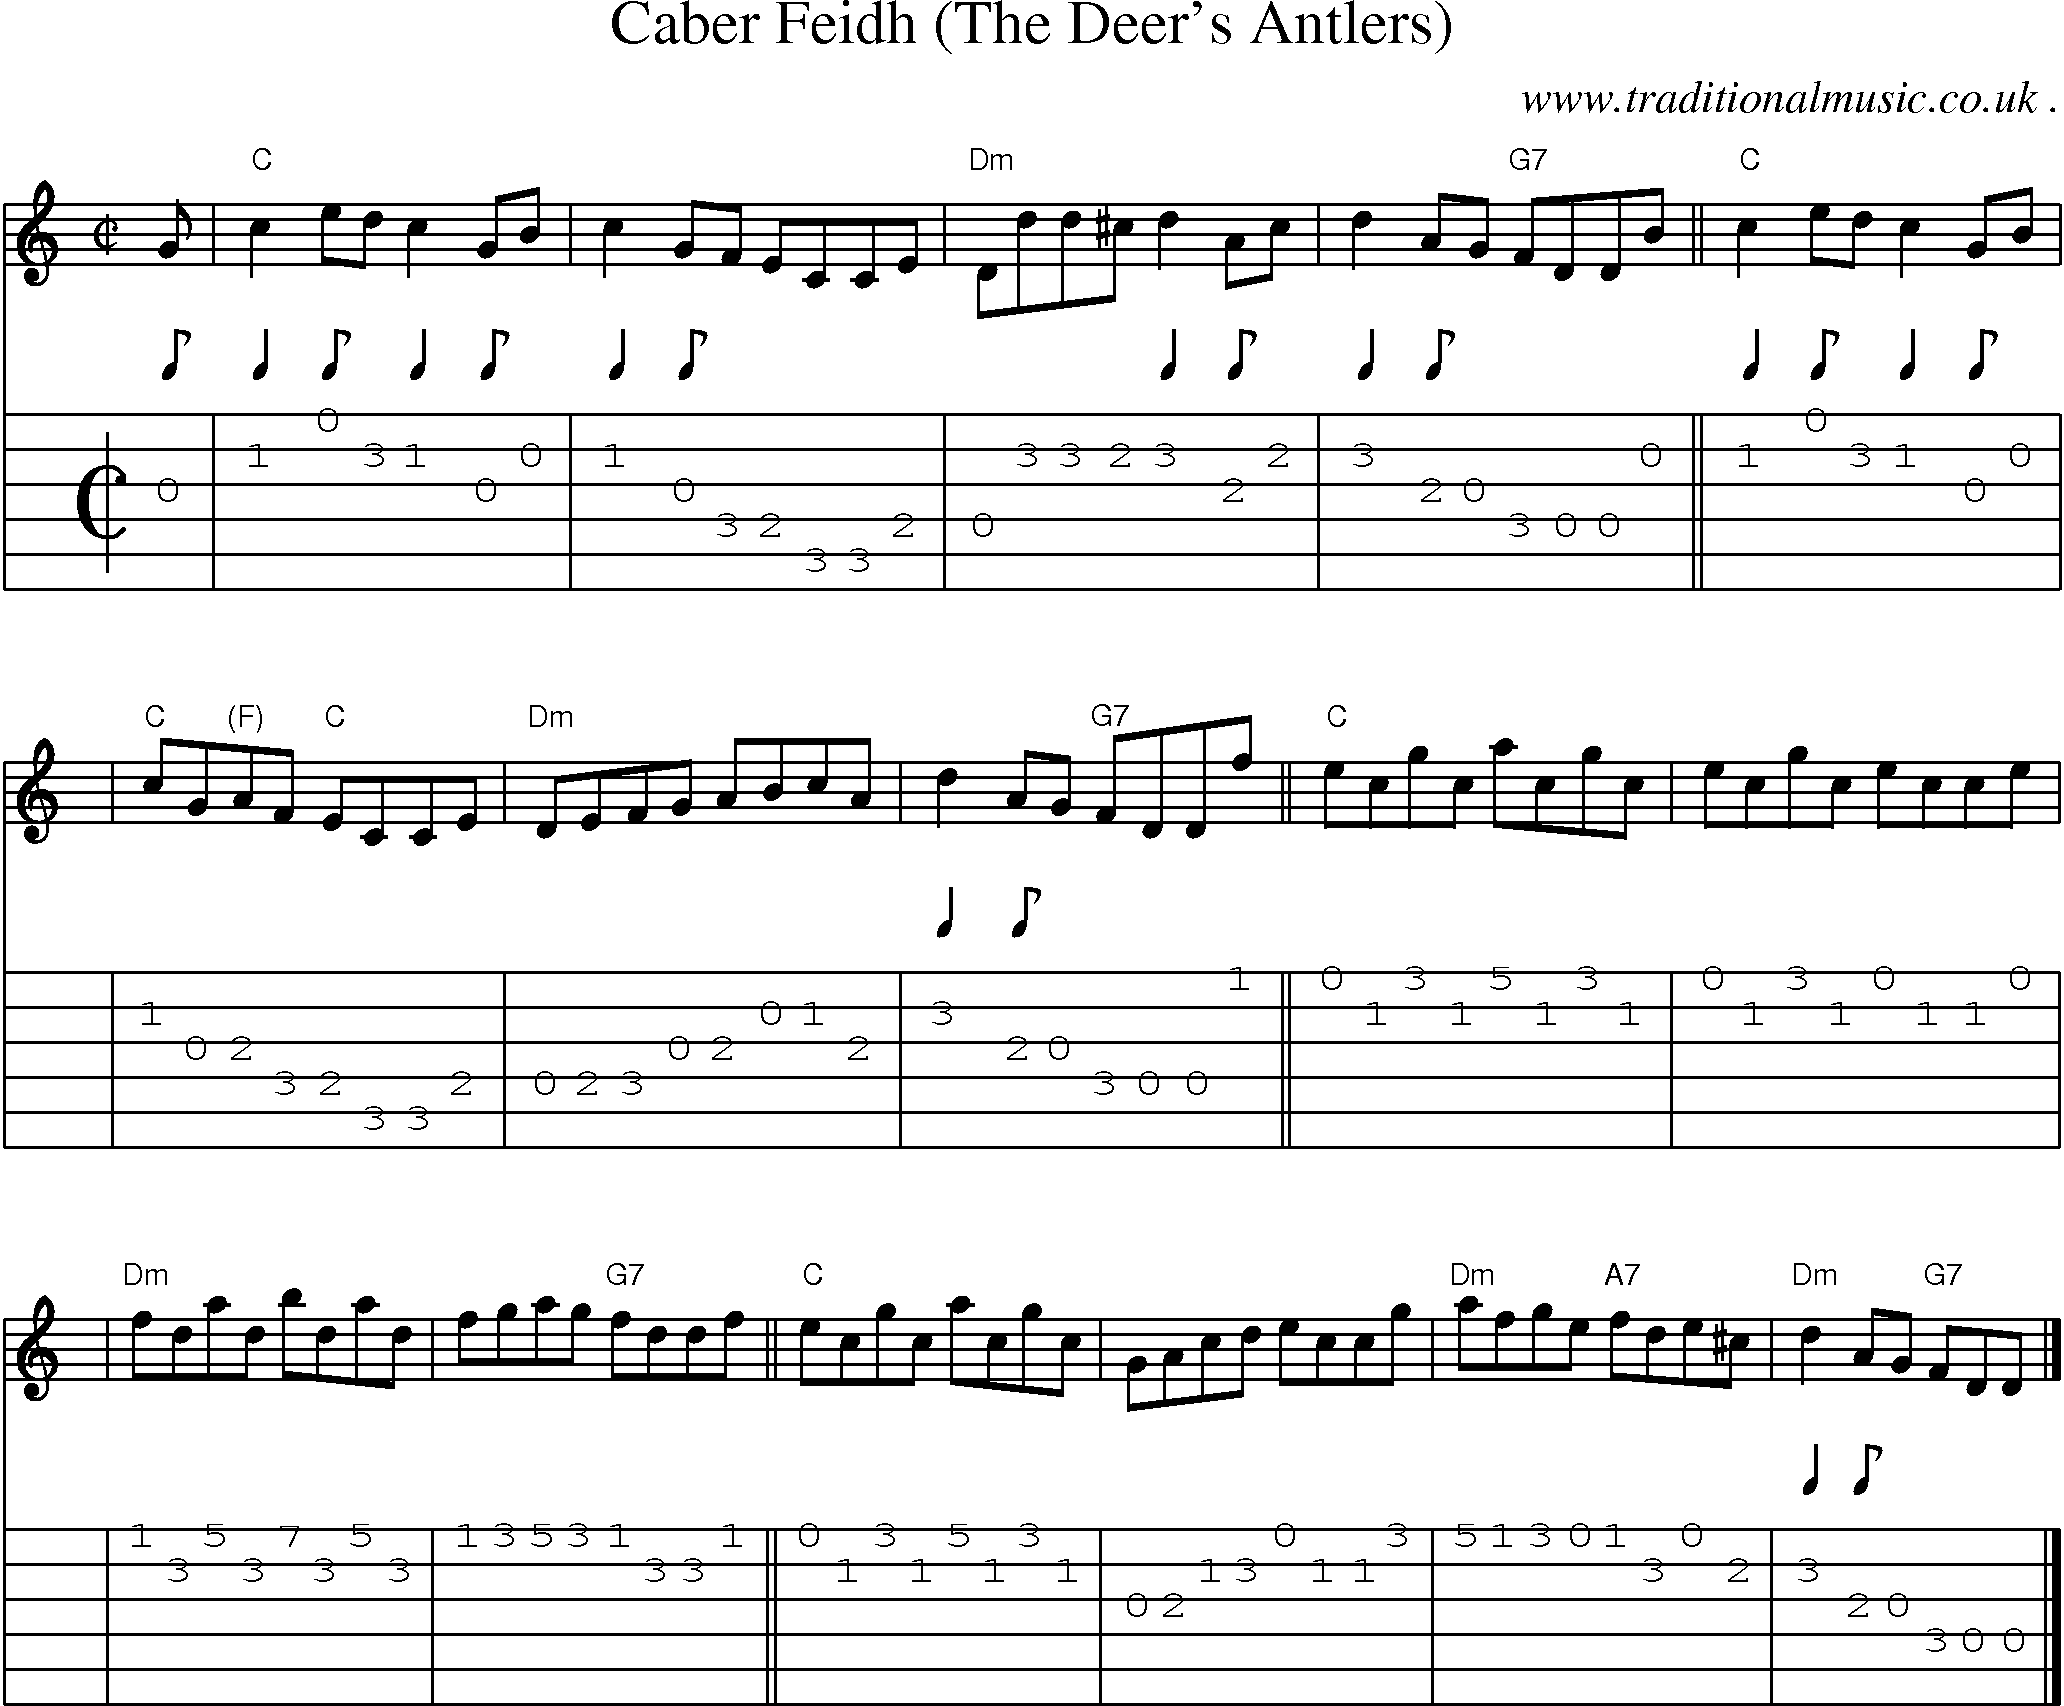 Sheet-music  score, Chords and Guitar Tabs for Caber Feidh The Deers Antlers